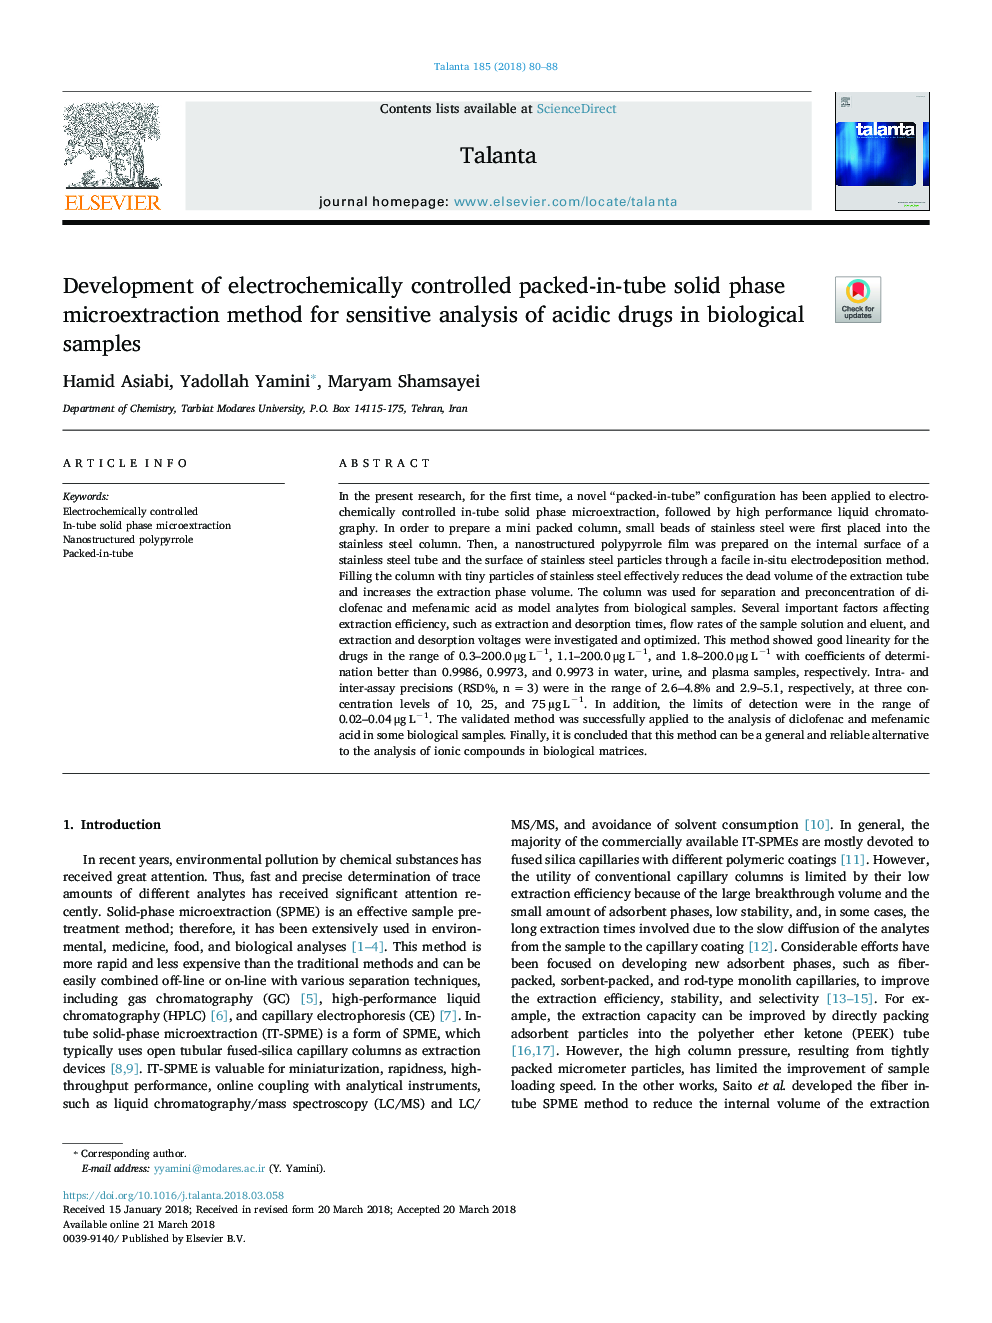 Development of electrochemically controlled packed-in-tube solid phase microextraction method for sensitive analysis of acidic drugs in biological samples